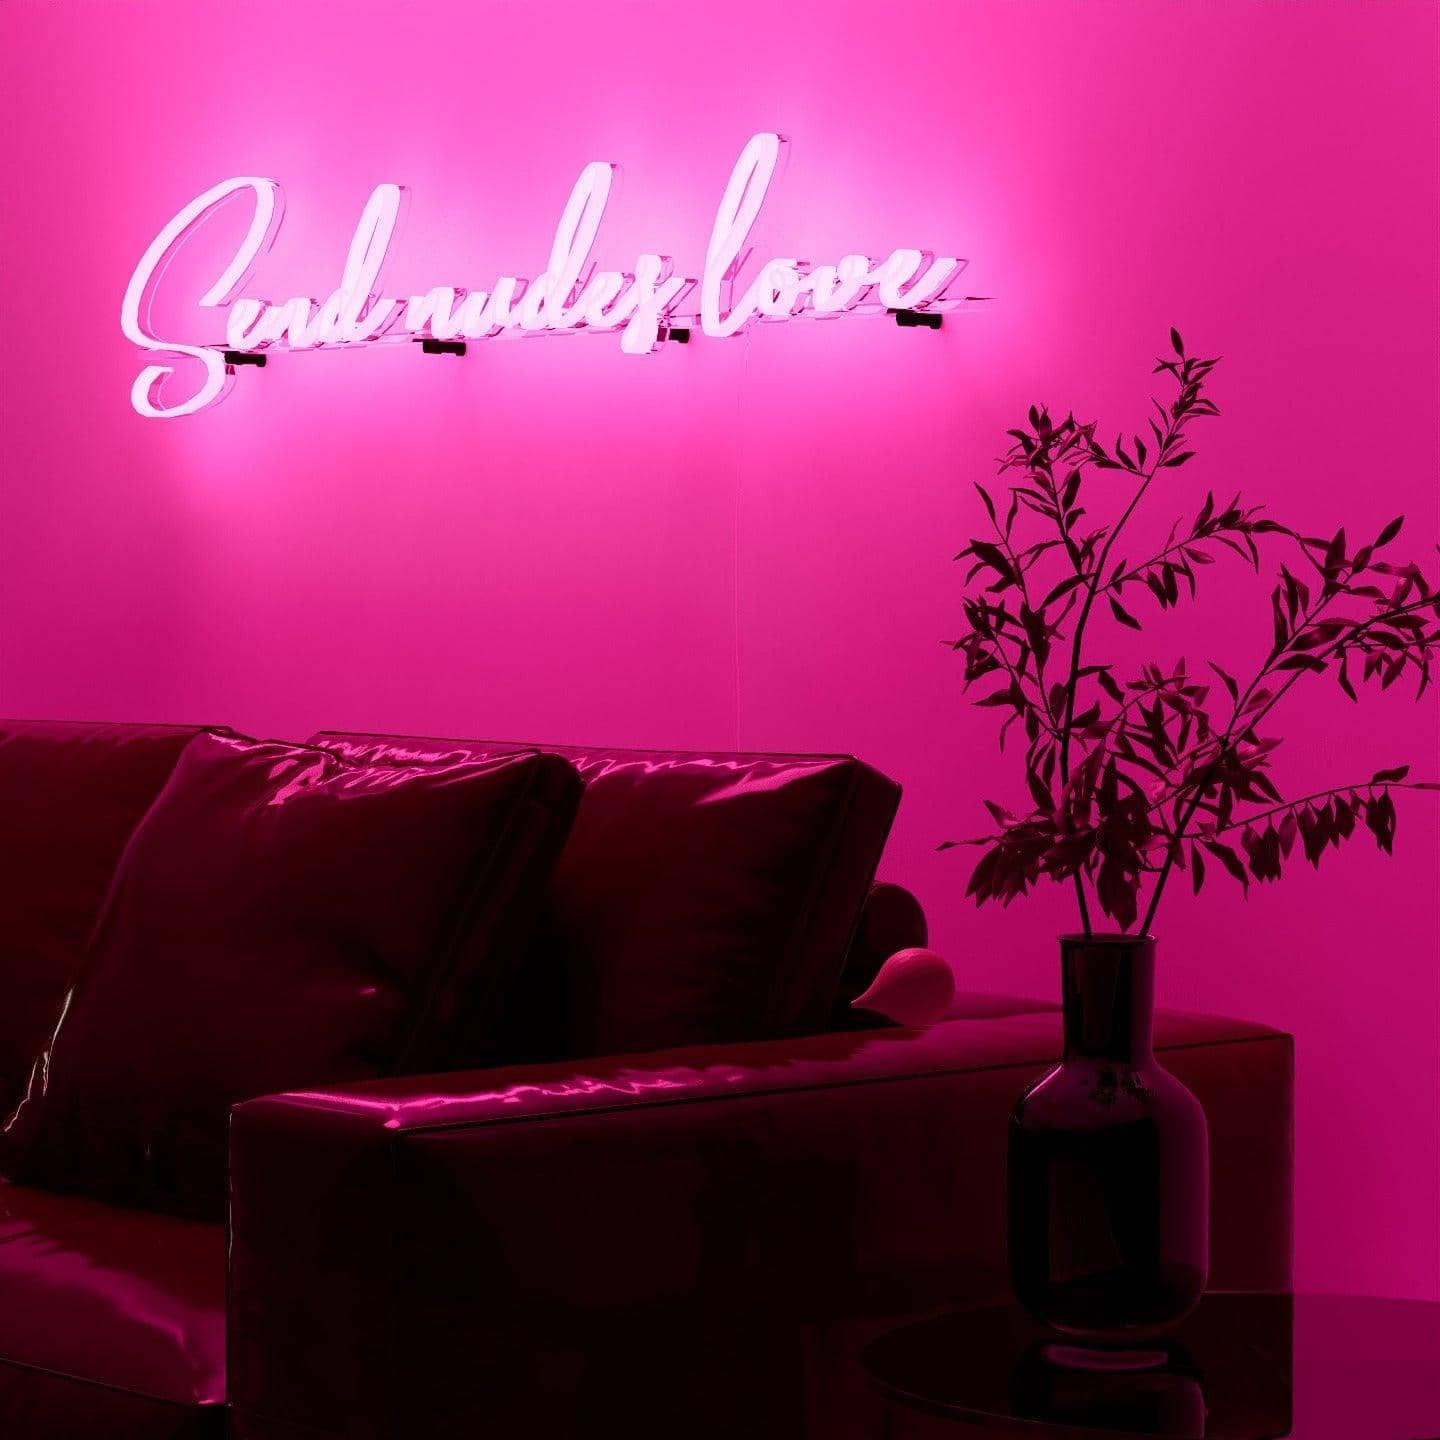 dark-night-lit-pink-neon-lights-hanging-on-the-wall-for-display-send-nudes-love